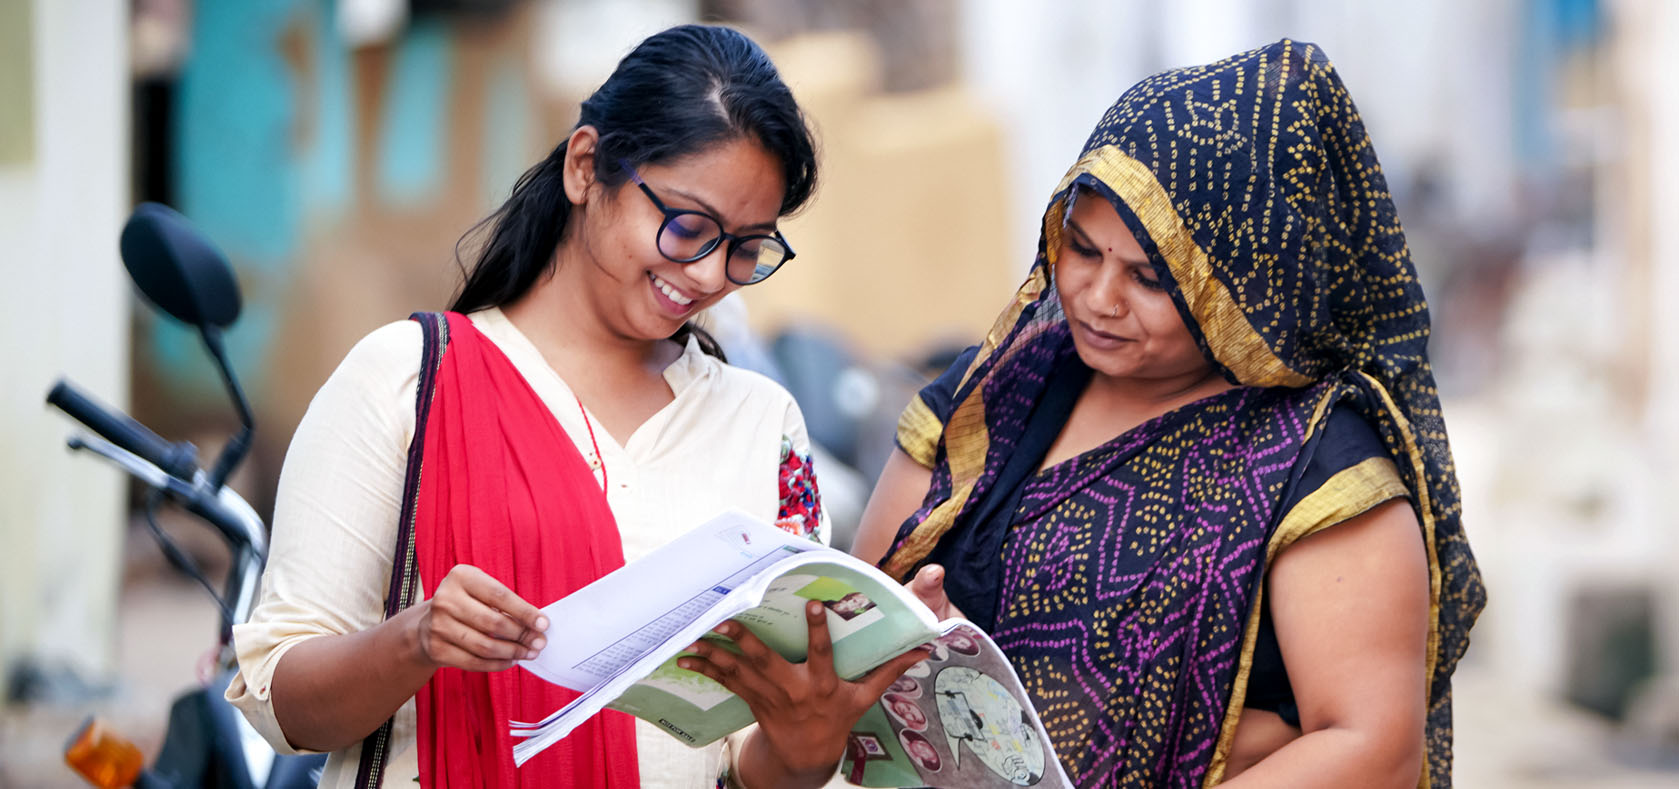 Sarita Mehra (on the right) from Baran, Rajasthan, is a participant of UN Women’s Second Chance Education Programme. She can be seen here with Project Associate Saadiya Anjum (on the left). “When I was in class five, my father told me that he couldn’t afford my education anymore. After I got married, my husband was supportive of continuing my education, but my mother in-law disagreed. The desire to study kept haunting me.” Sarita Mehra enrolled back into formal education in 2020; she is working as a trainer at the Pradhan Mantri Kaushal Kendra centre in Baran, teaching beautician courses. Photo: UN Women India